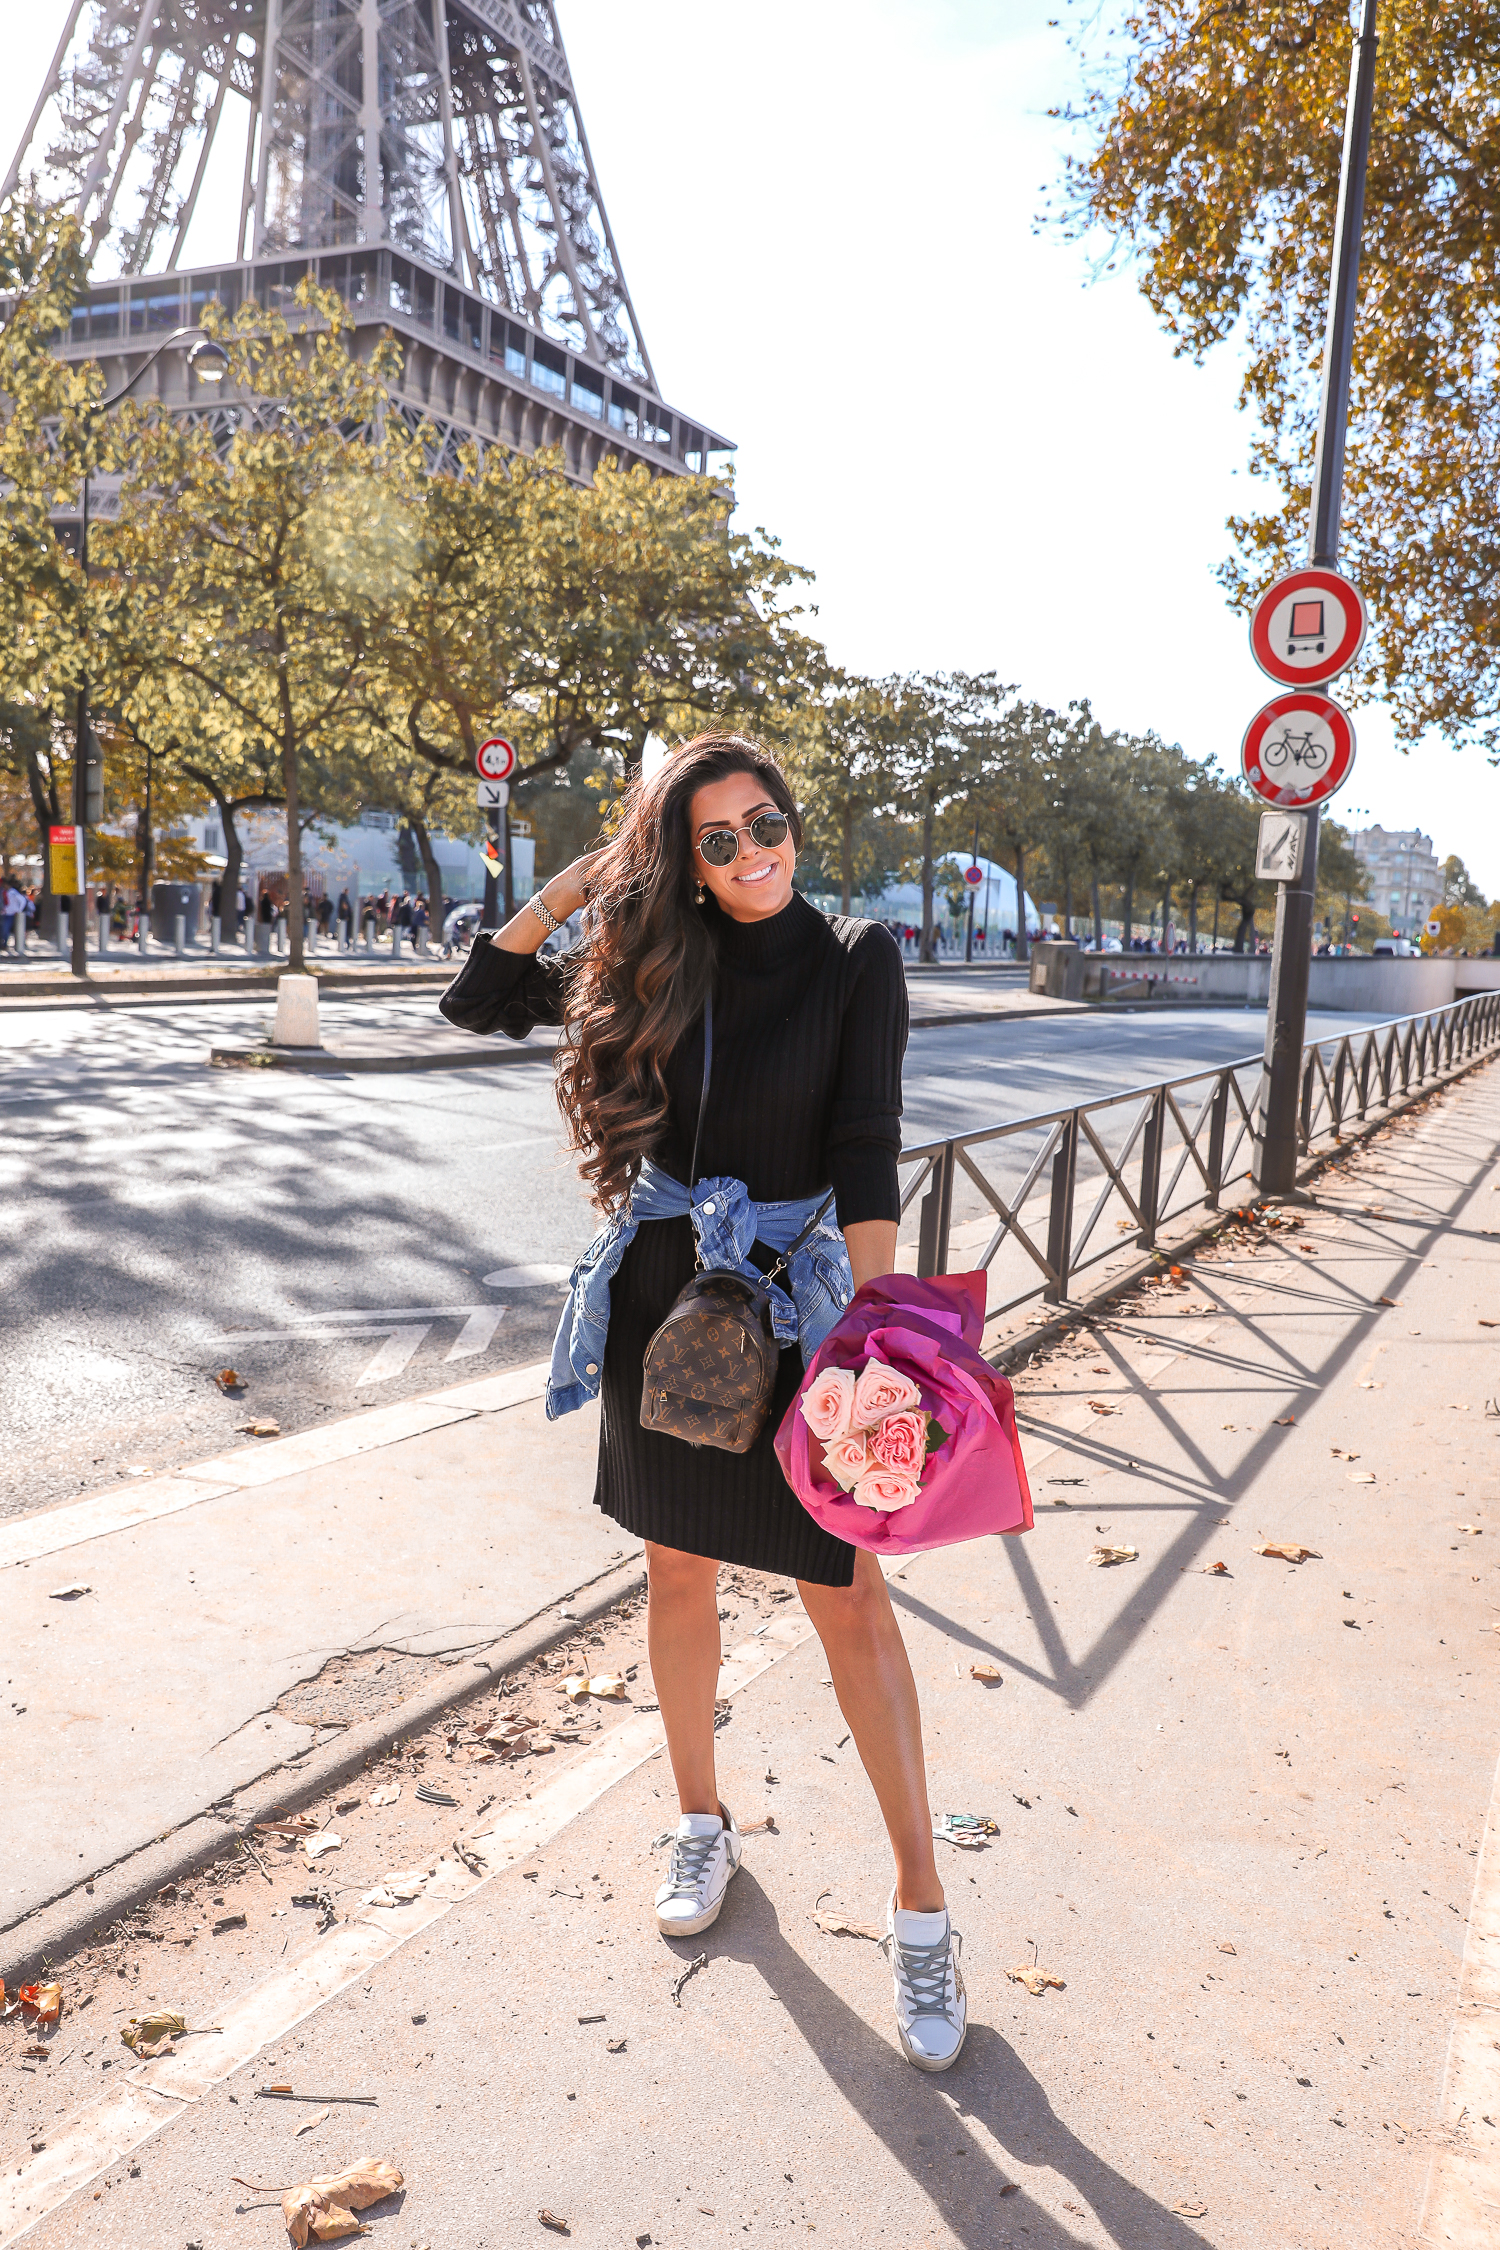 fall fashion 2019 outfits pinterest, golden goose sneakers outfits, gold glitter golden goose, emily ann gemma, what to wear in paris in october 15